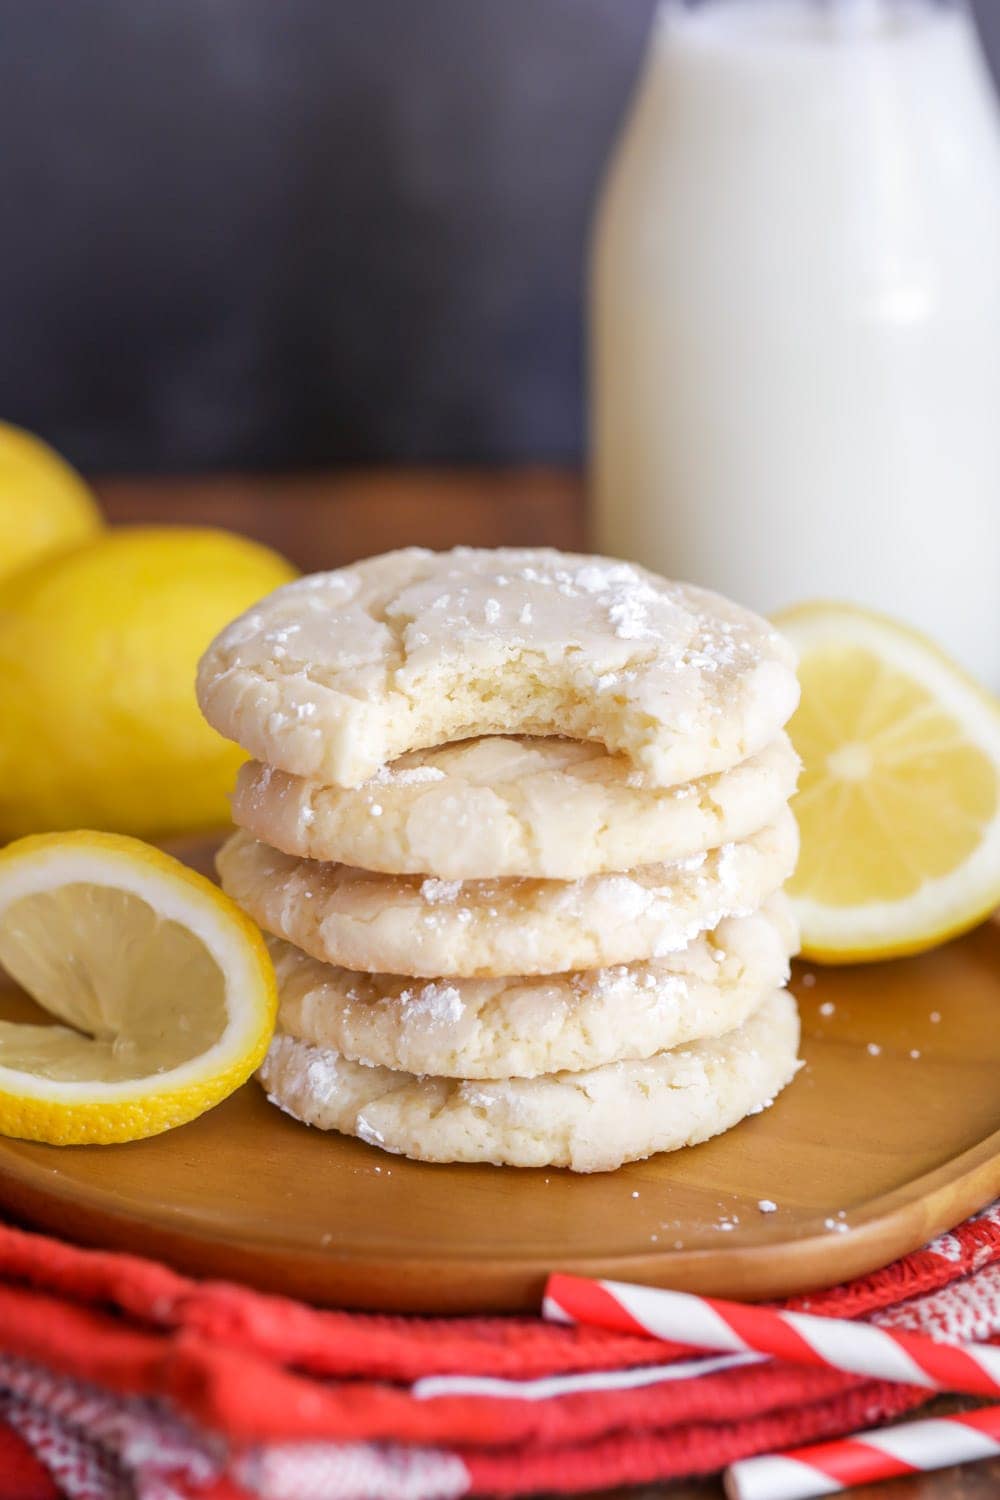 Lemon crinkle cookie recipe stacked on a wooden plate.